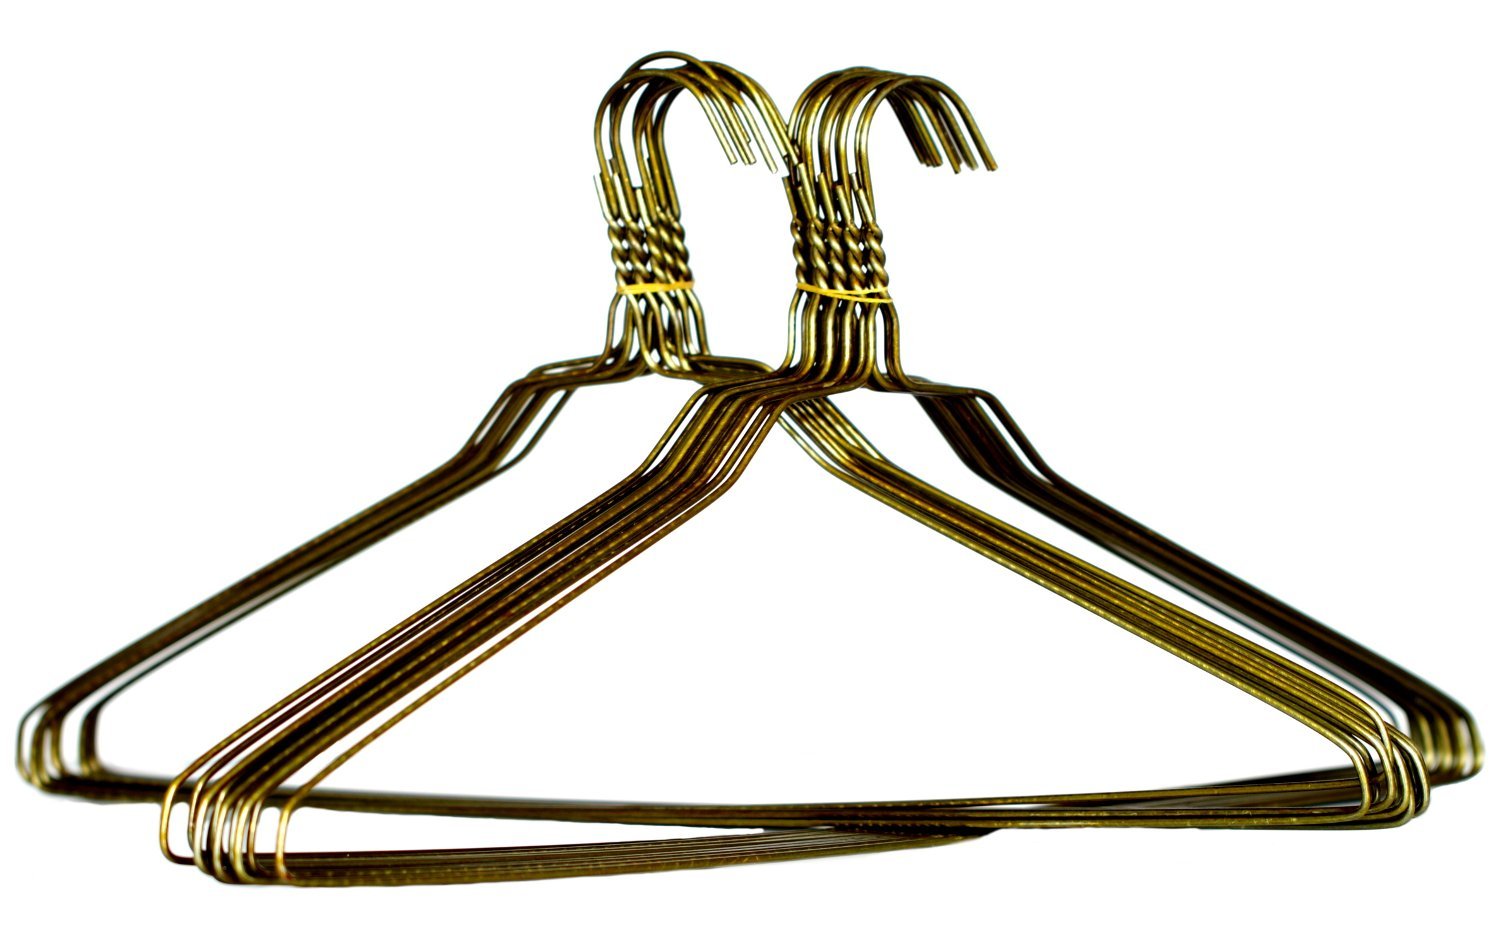 Popular Product Reviews by Amy: 50 Gold Heavy Duty Wire Coat Hangers by